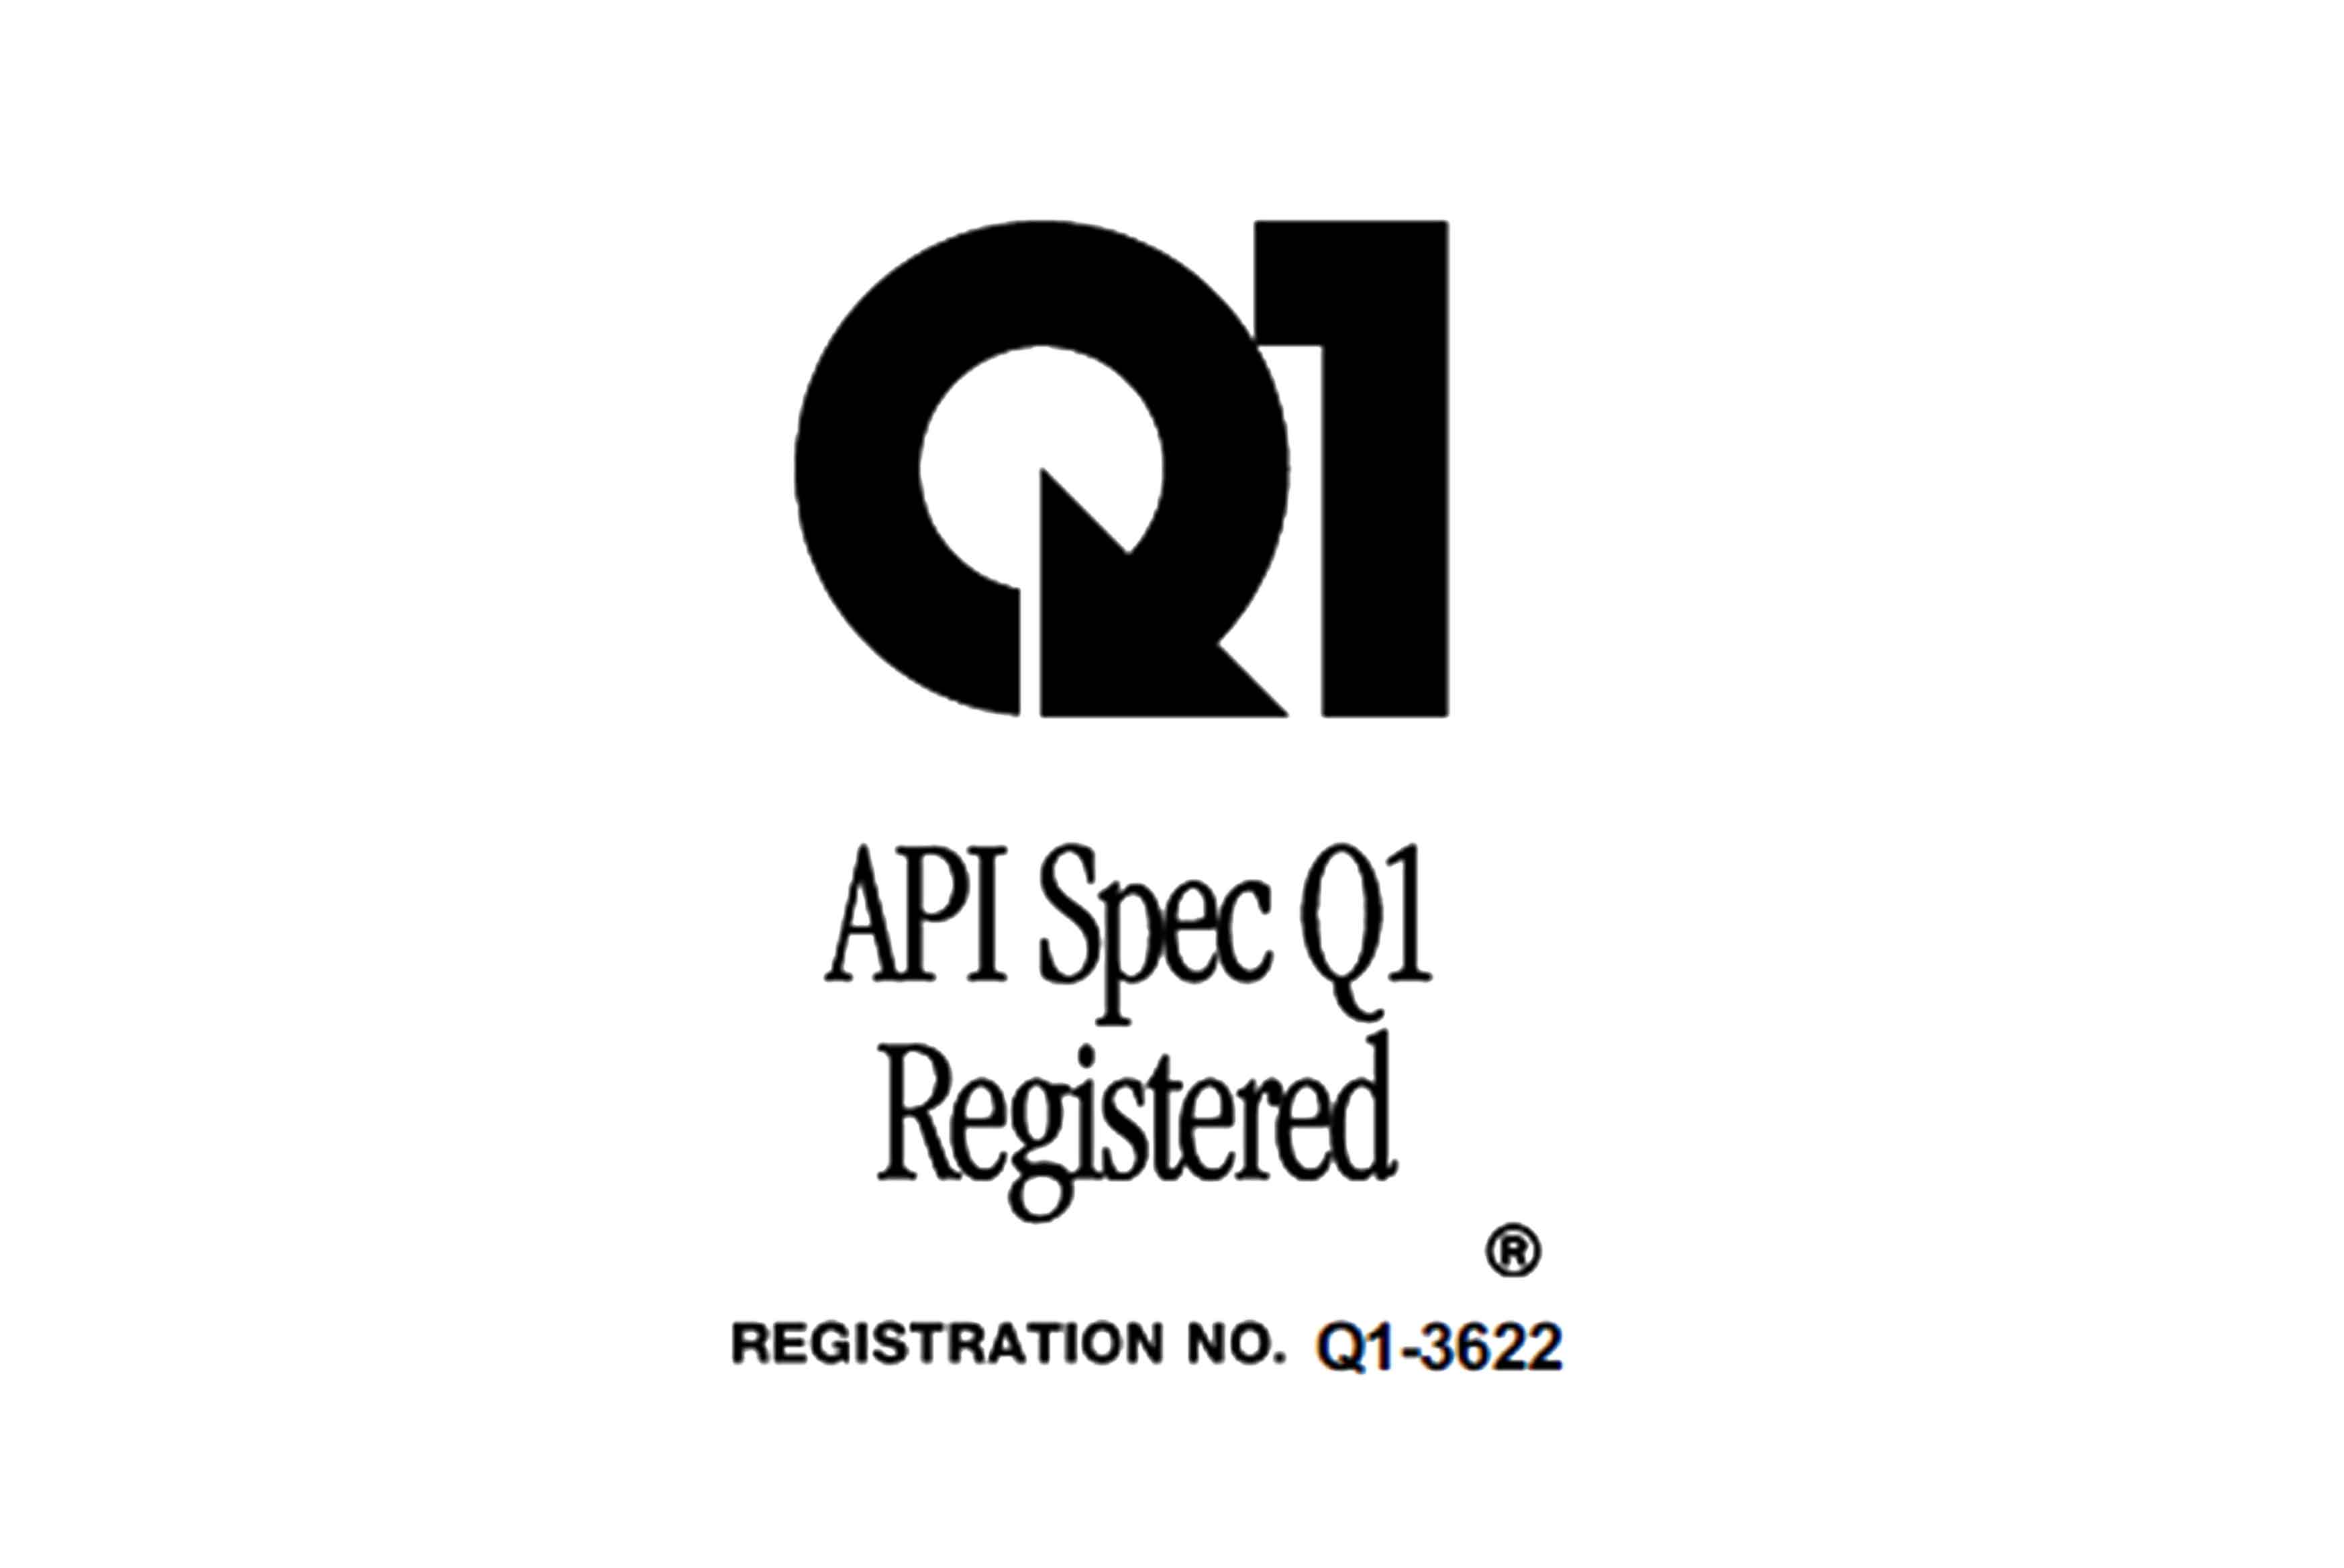 Congrats! JST passed the API Q1 annual audit!